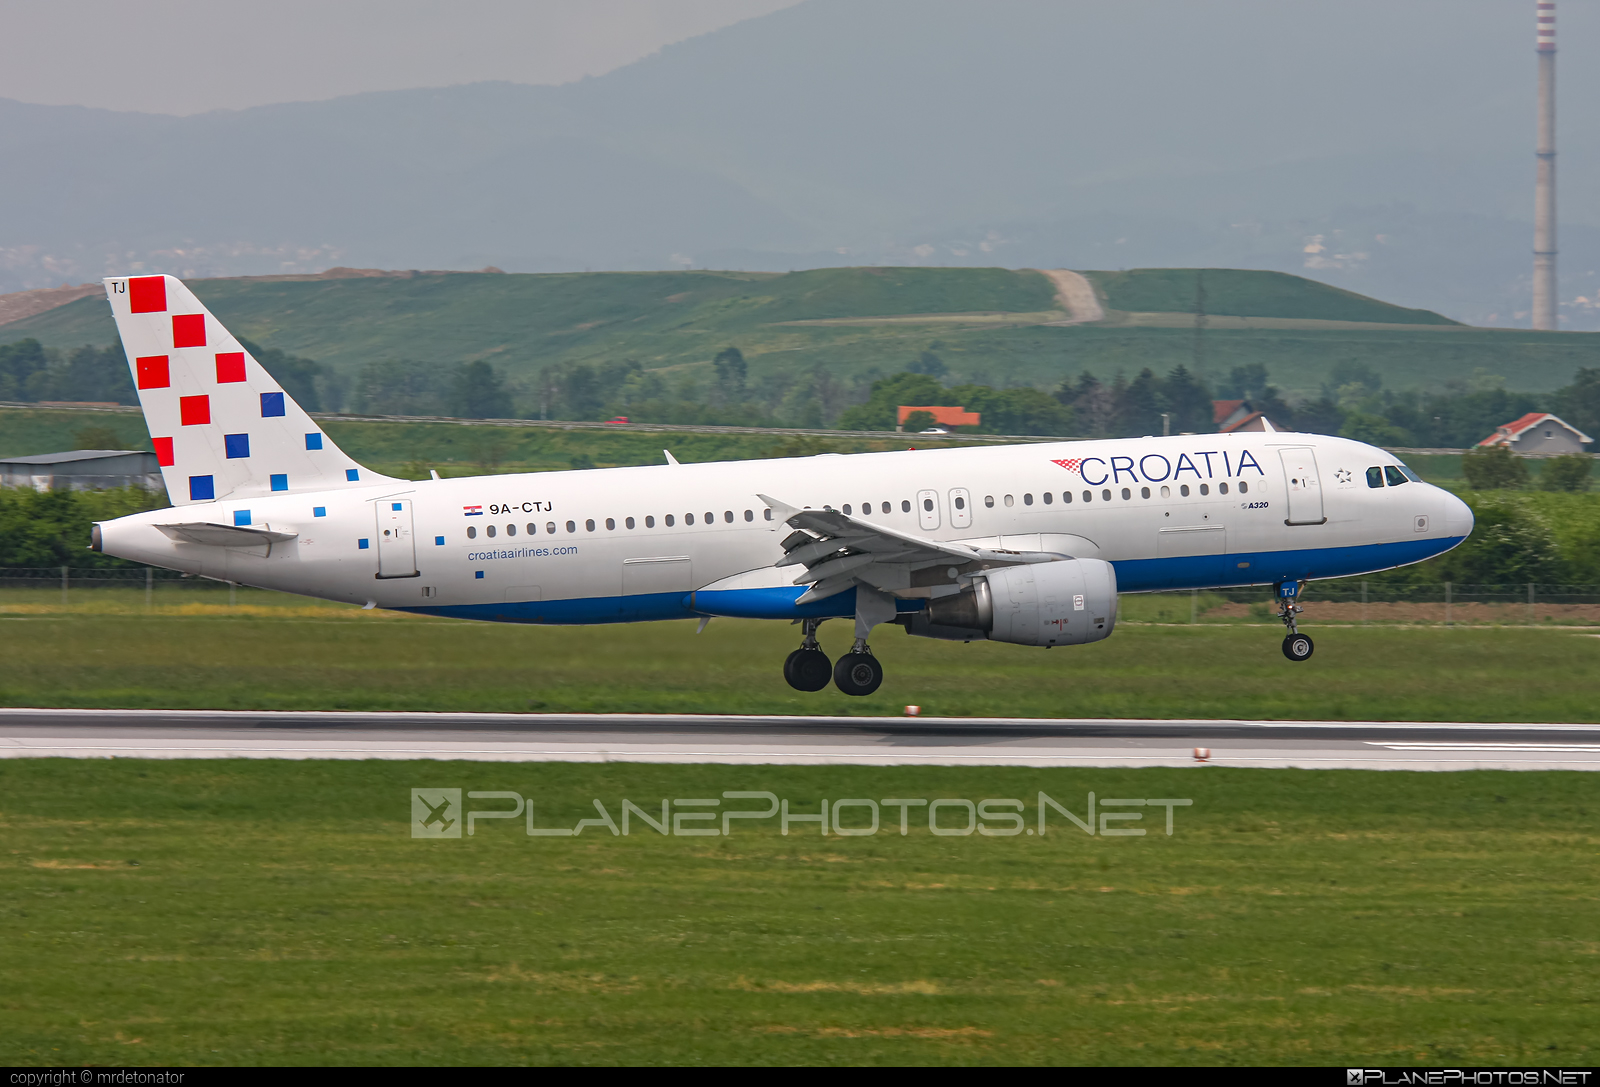 Airbus A320-214 - 9A-CTJ operated by Croatia Airlines #CroatiaAirlines #a320 #a320family #airbus #airbus320